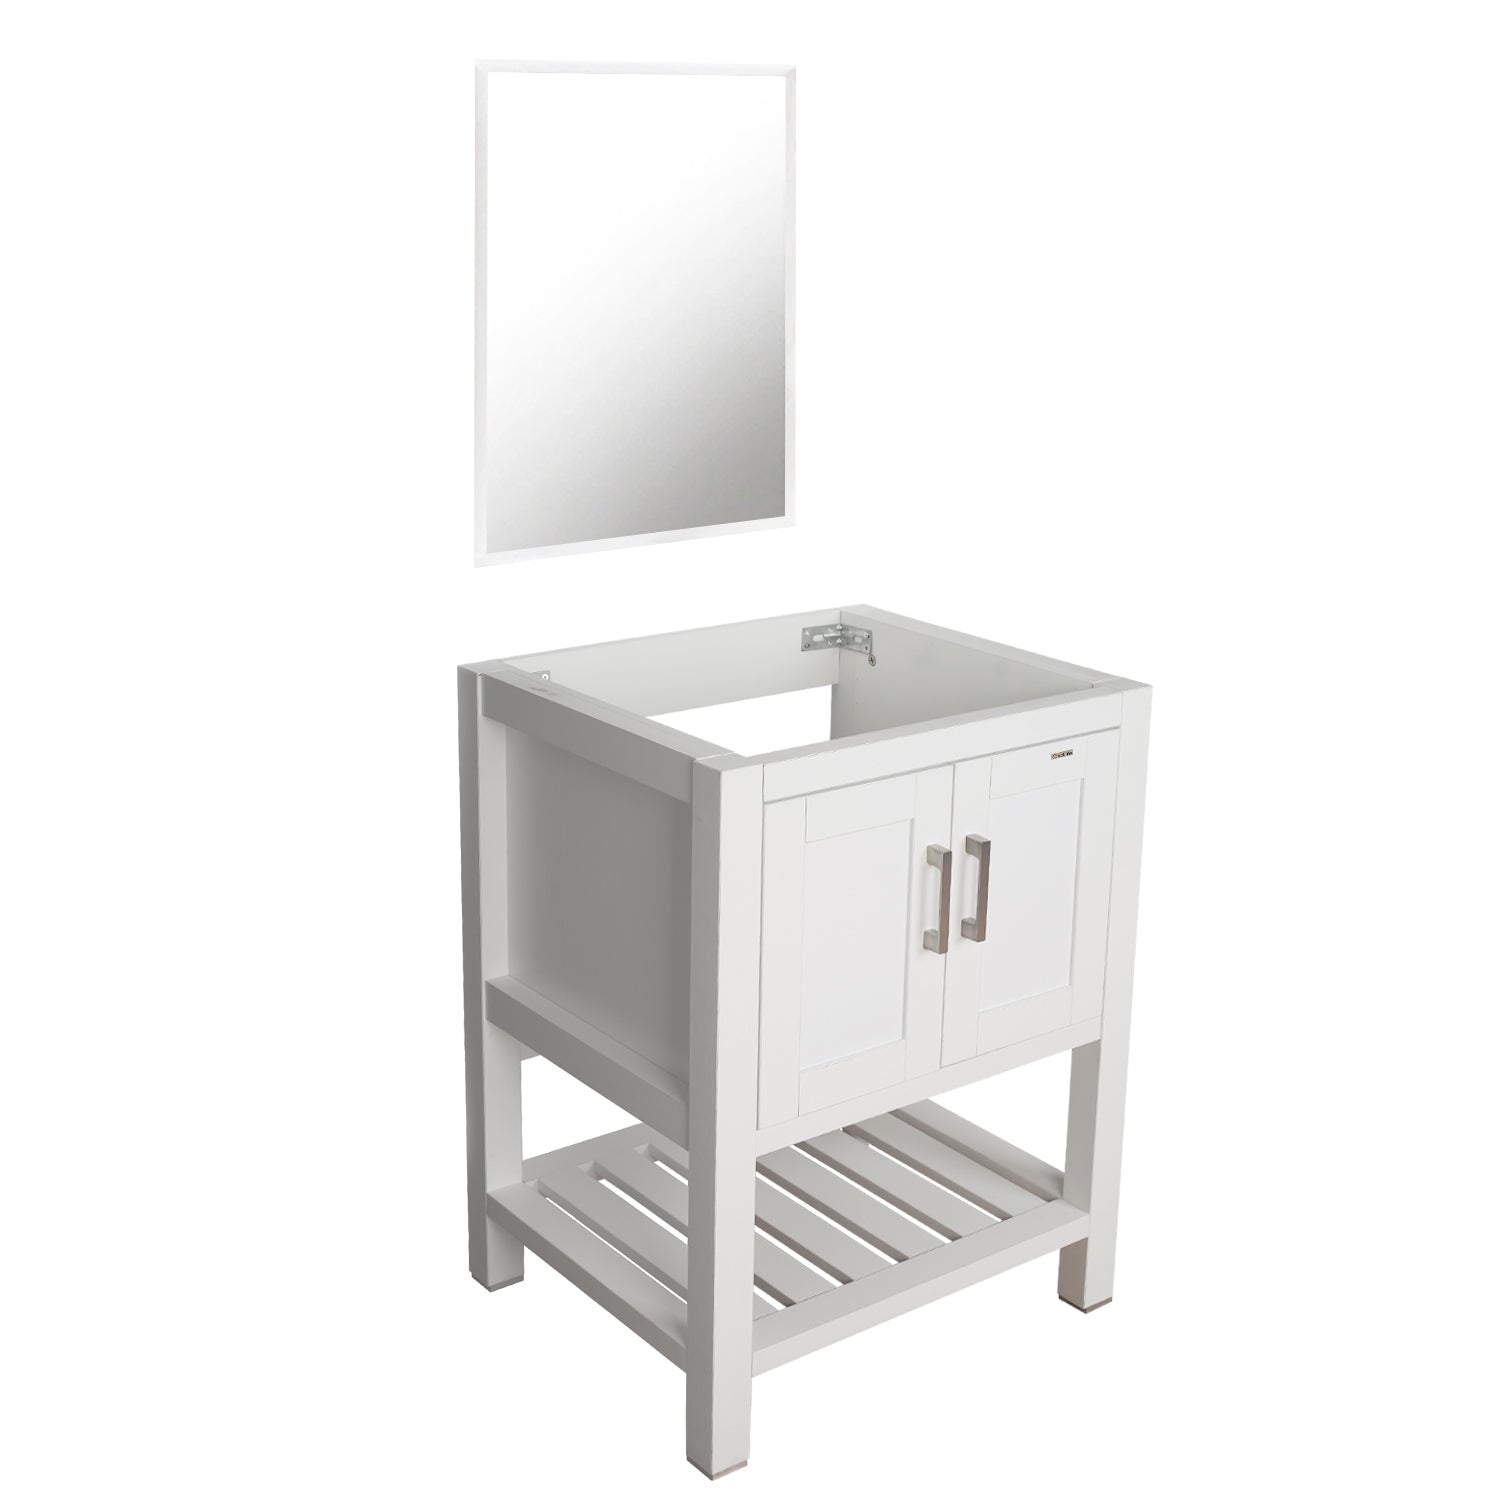 Bathroom Vanity with Wooden counter top and storage-Boyel Living